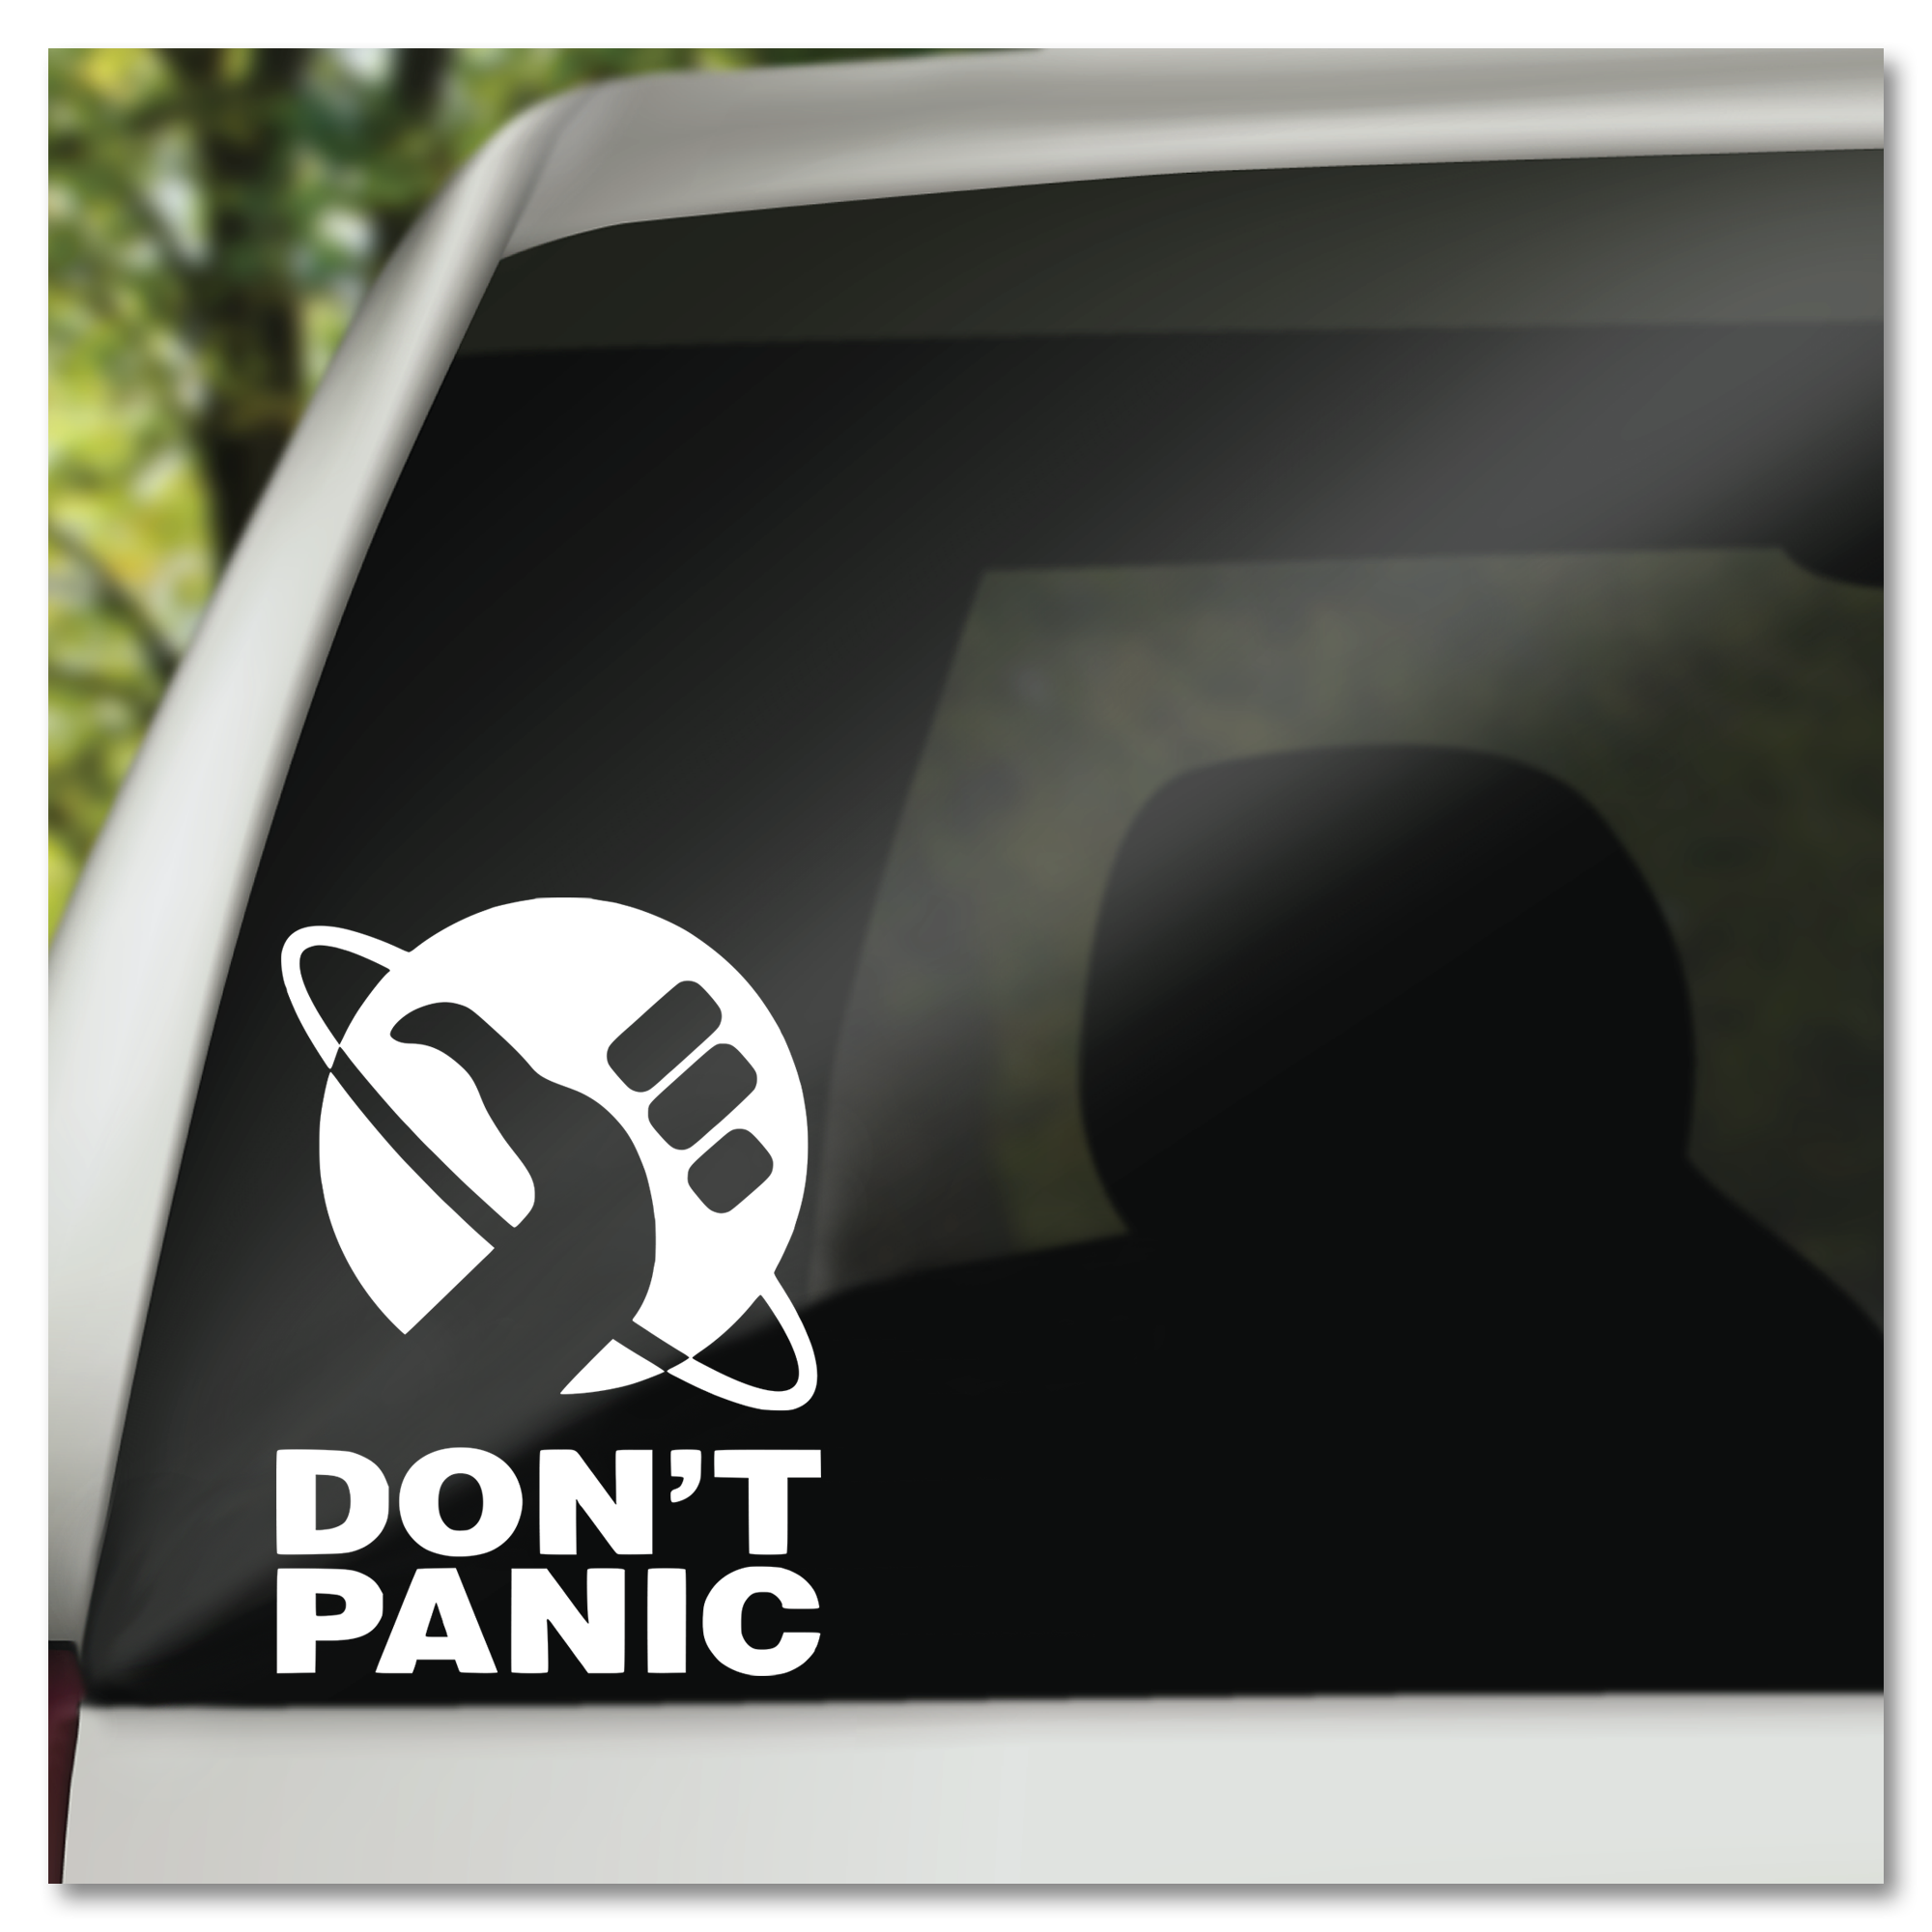  Hitchhiker's Guide to The Galaxy Don't Panic Black Decal Vinyl  Sticker, Cars Trucks Vans Walls Laptop, Black, 5.5 x 4 in